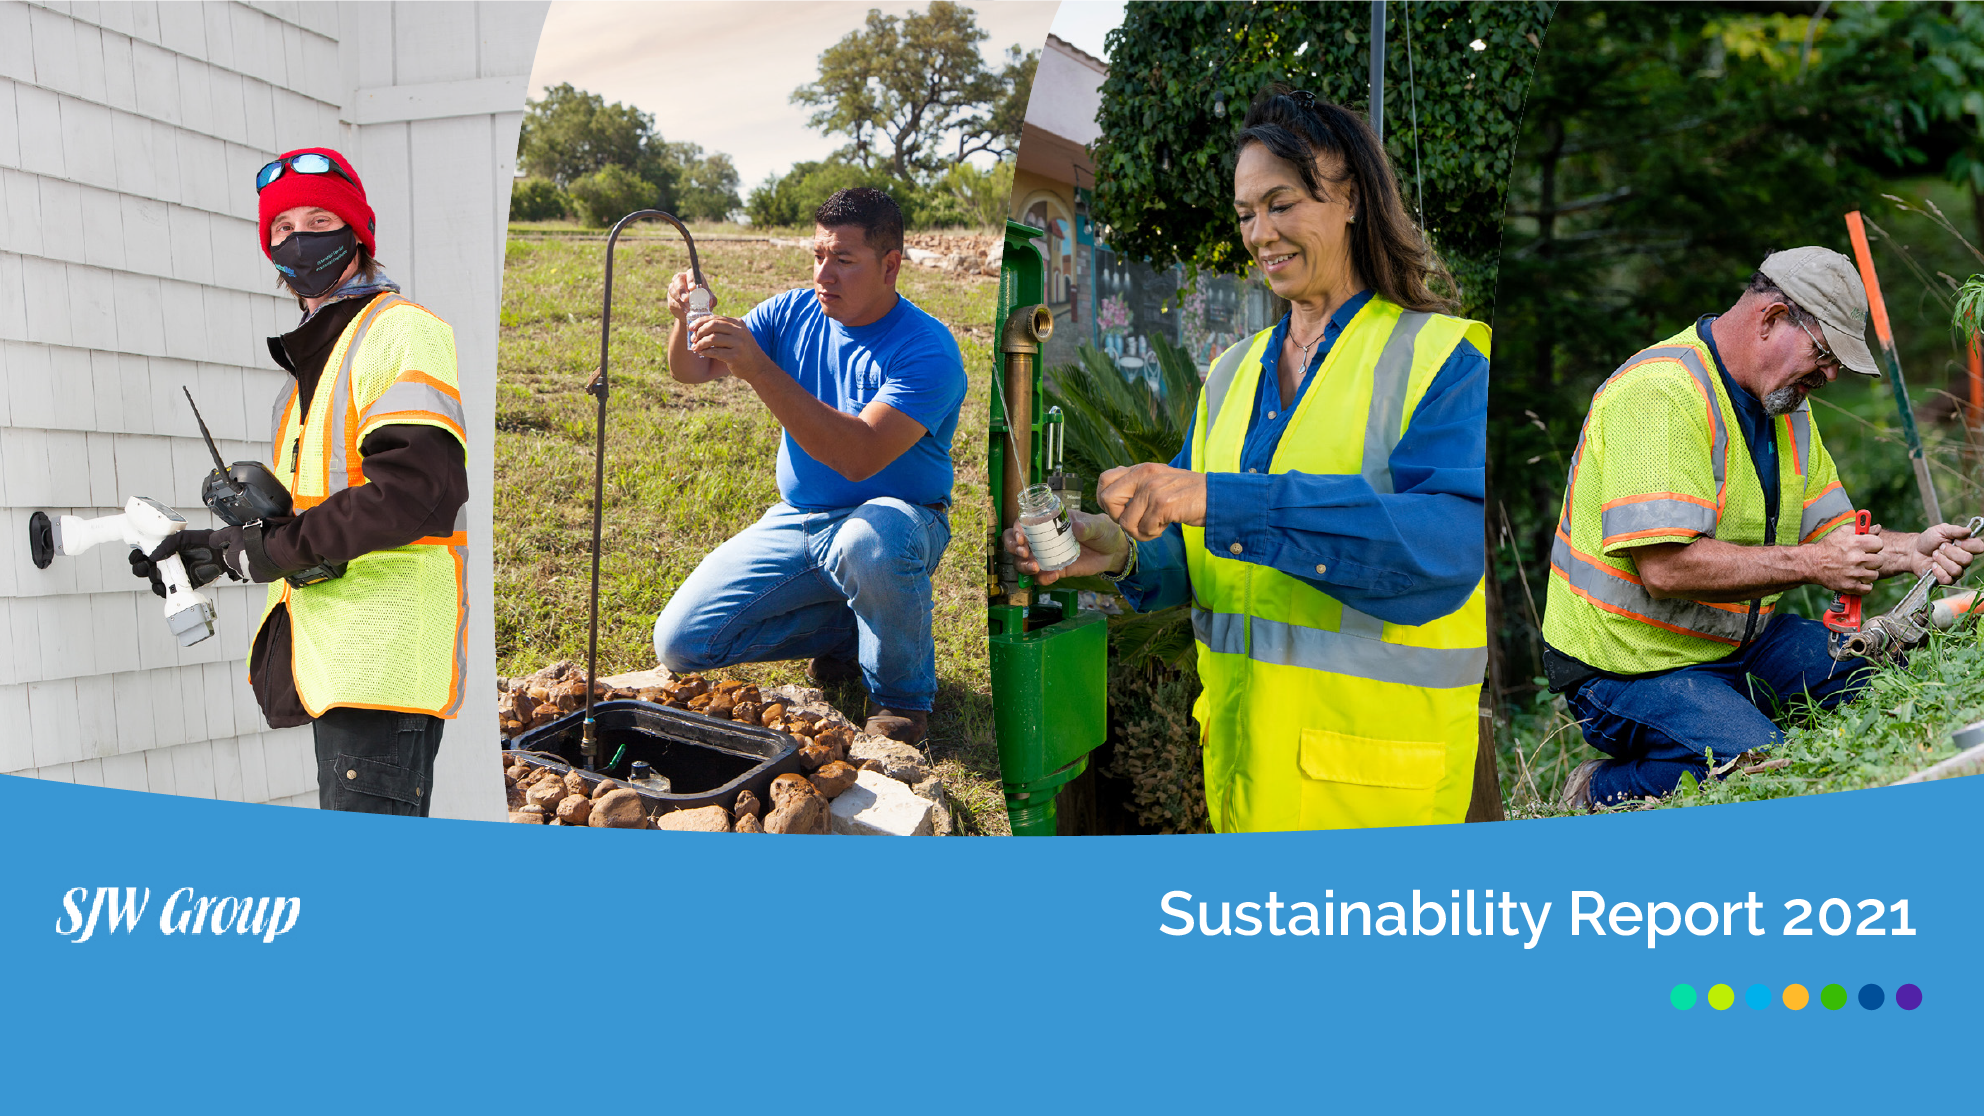 Cover image of Sustainability Report with 4 images of employees at SJW Group